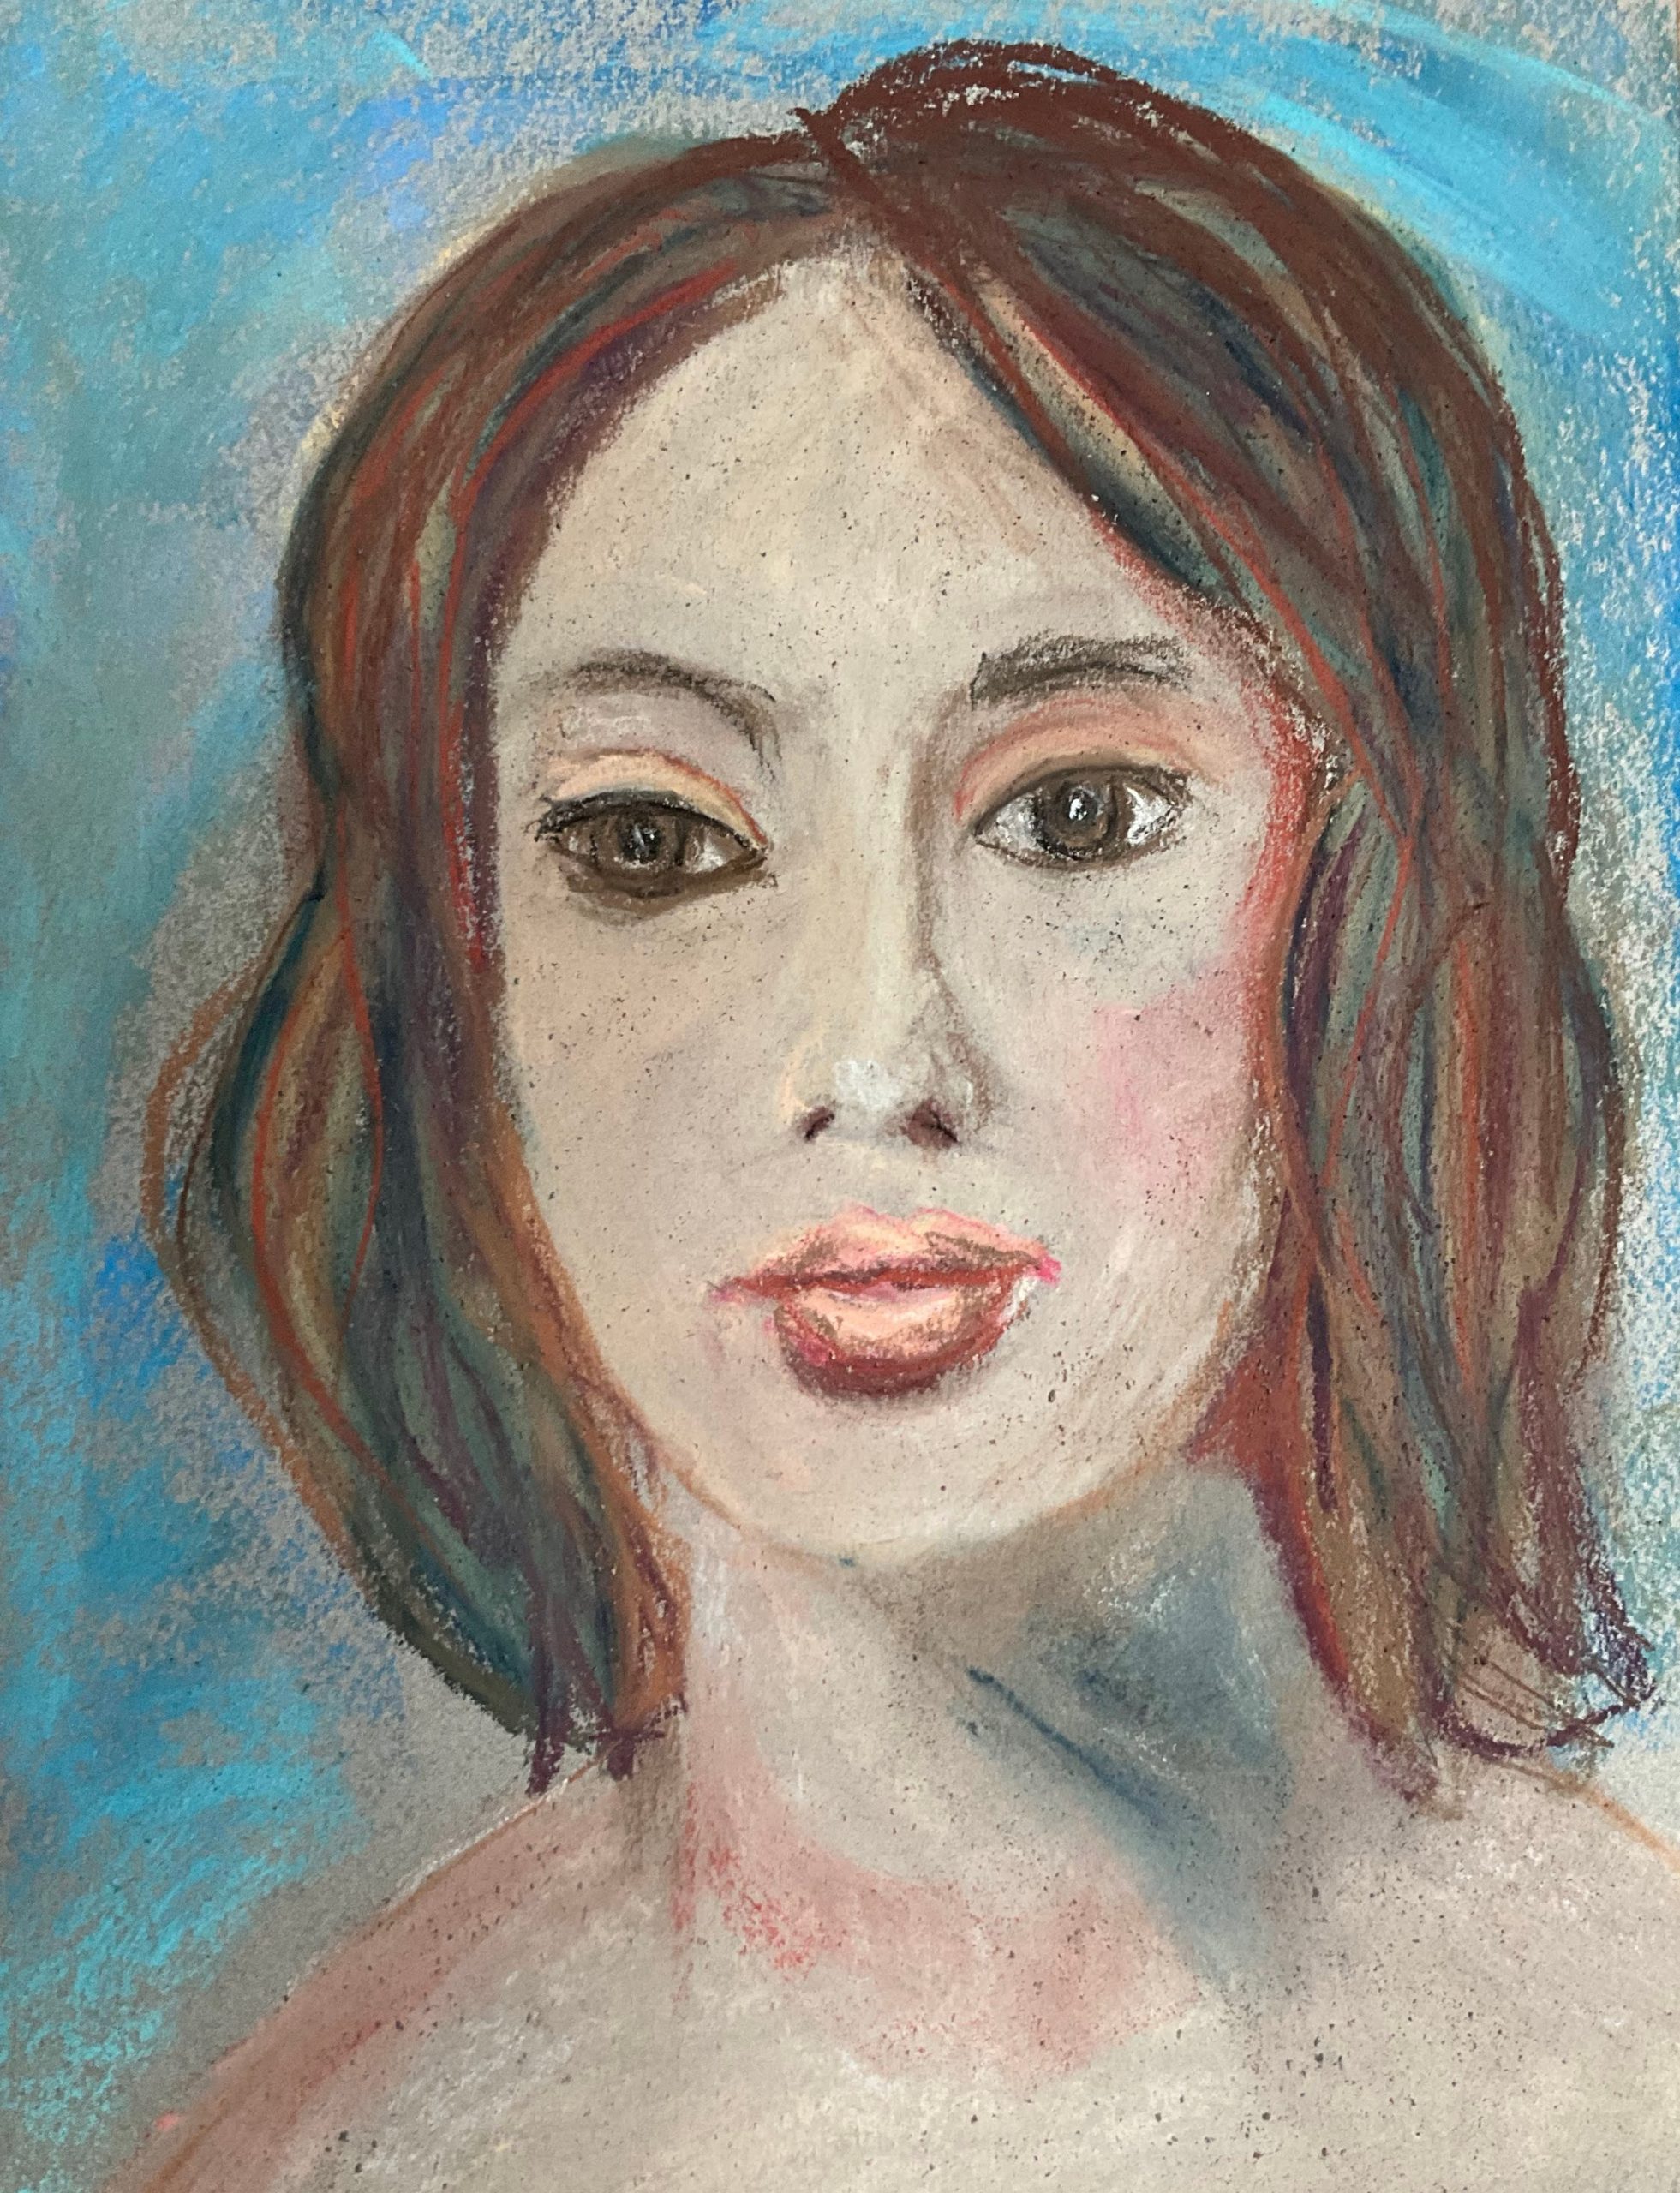 Pastel portrait of a young woman with brown hair.